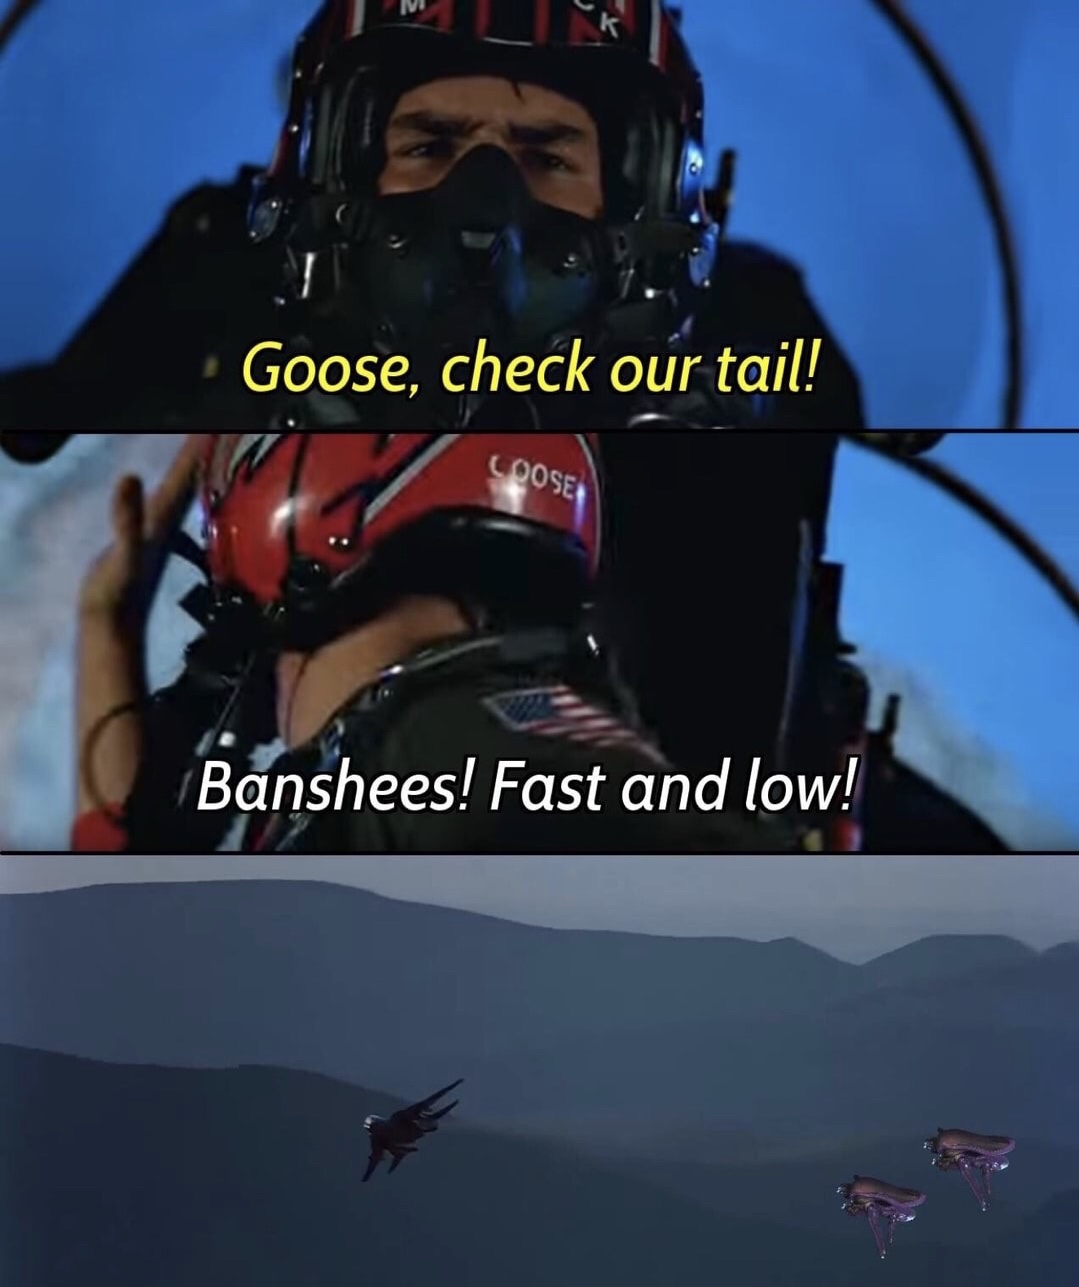 helmet - Goose, check our tail! Loose Banshees! Fast and low!